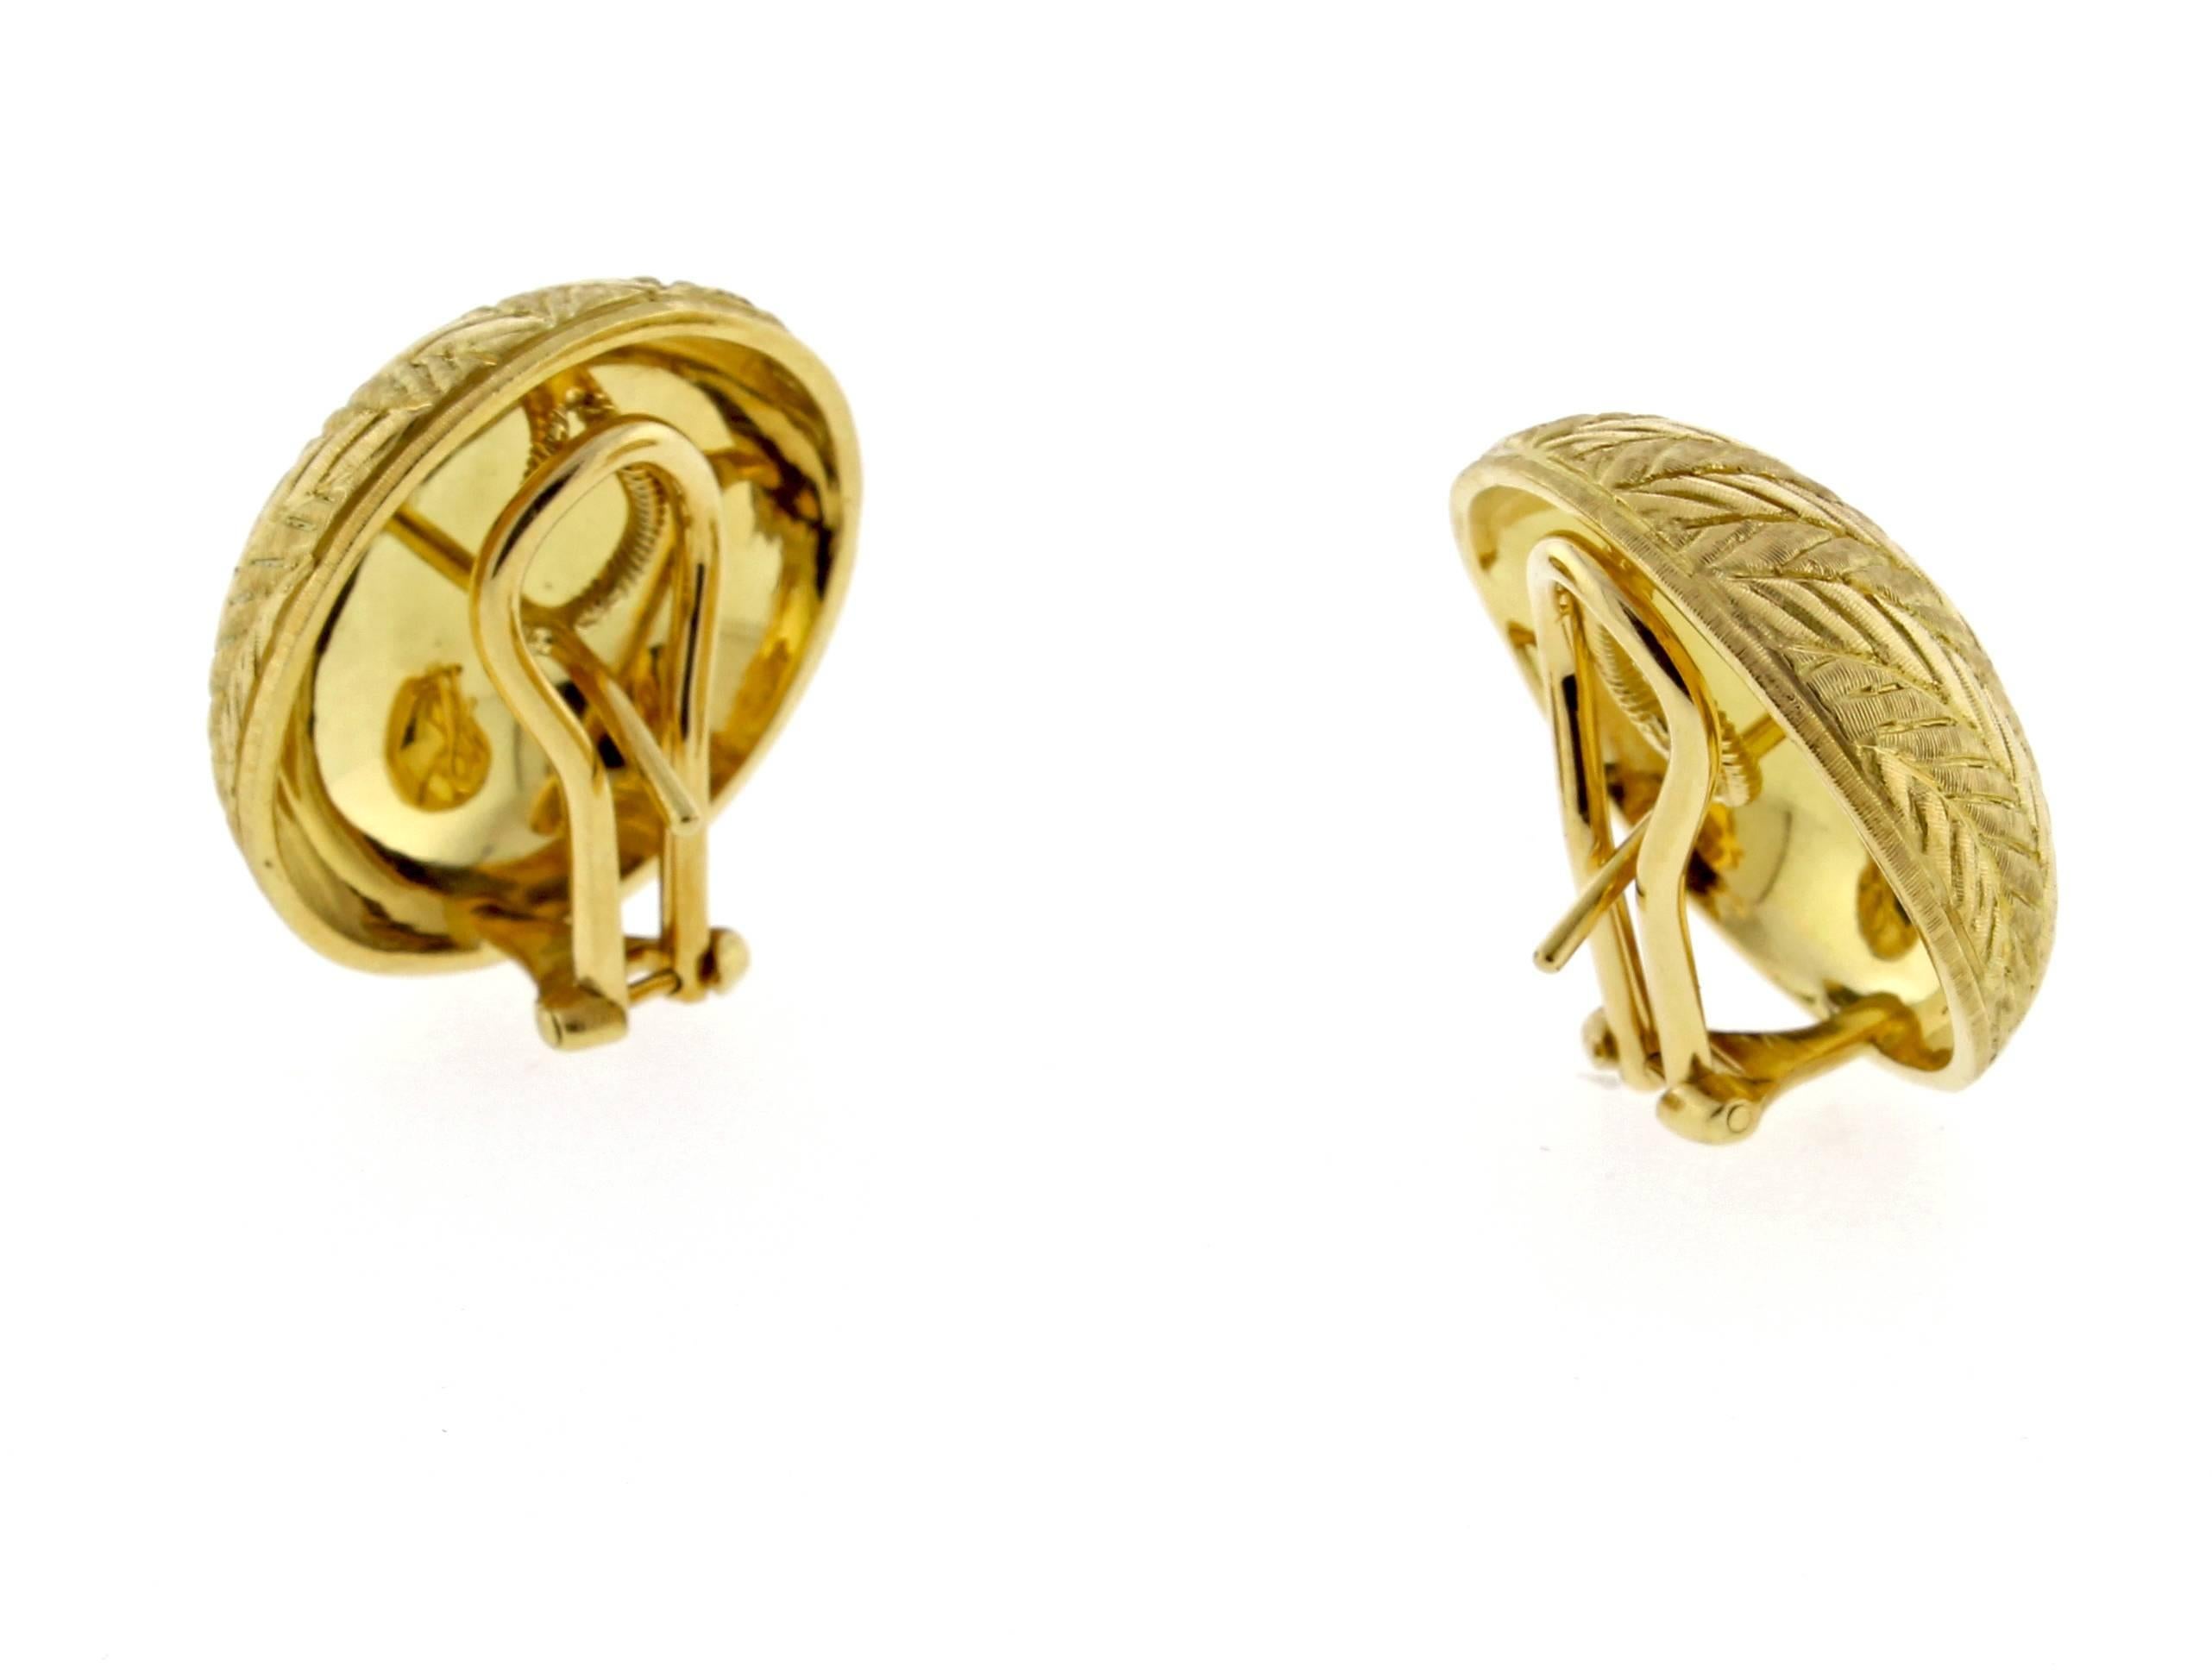 A pair of 18 karat yellow gold brushed finished button earrings with distinctive hand engraved herringbone pattern. Meticulously crafted by iconic Italian jeweler Buccellati, these earring are in as new condition.  Measuring 21.5mm (7/8 of an inch)